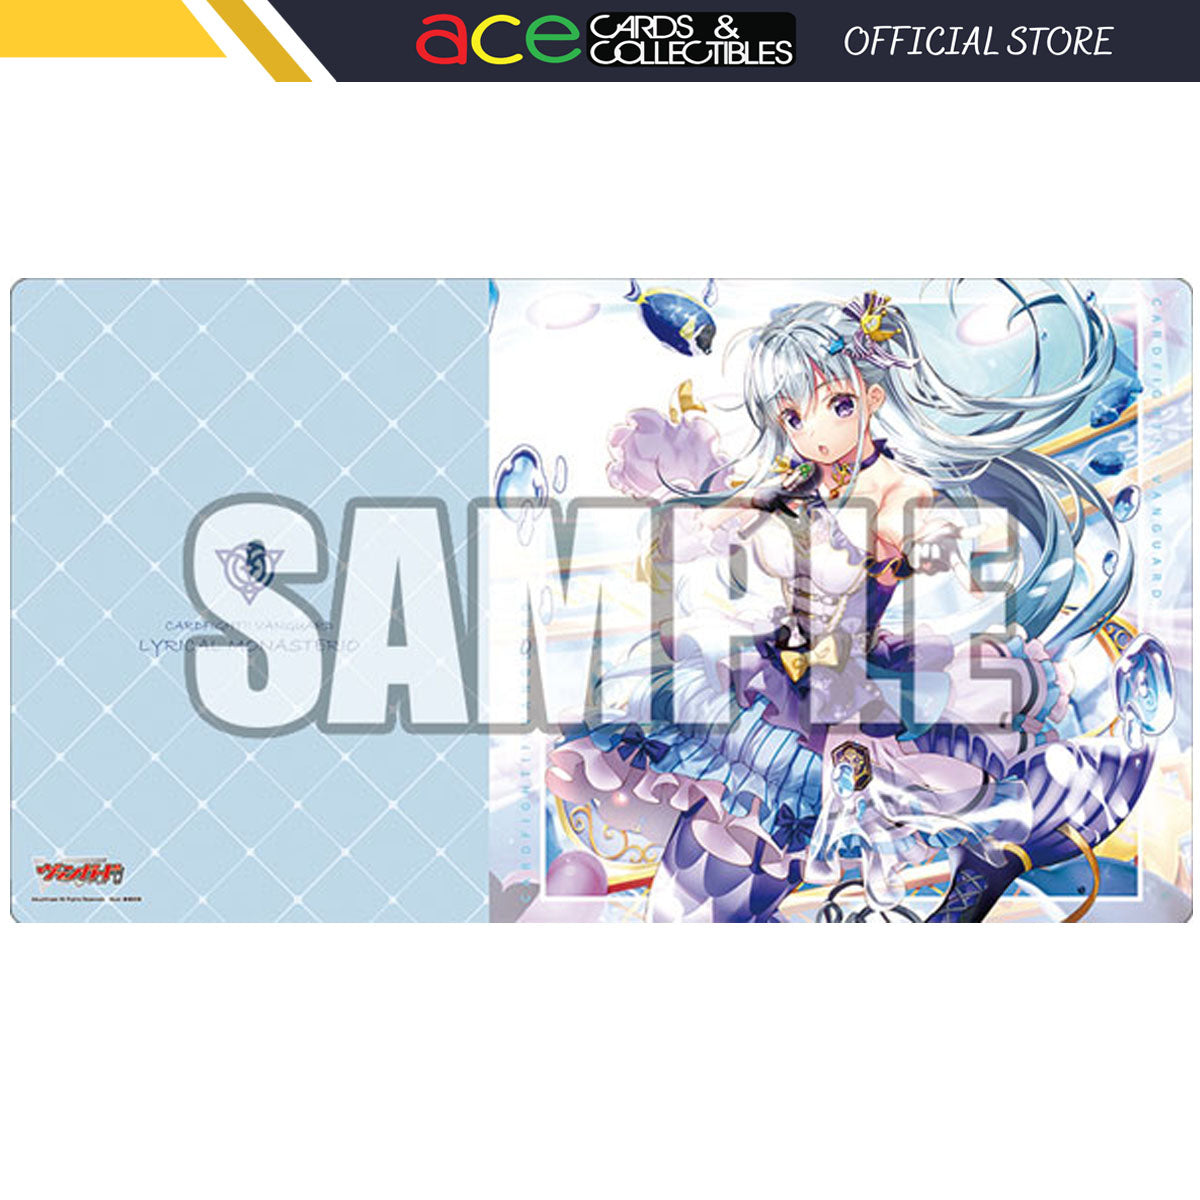 CardFight Vanguard Playmat Collection V2 Vol. 378 "Astesice, Kairi"-Bushiroad-Ace Cards & Collectibles